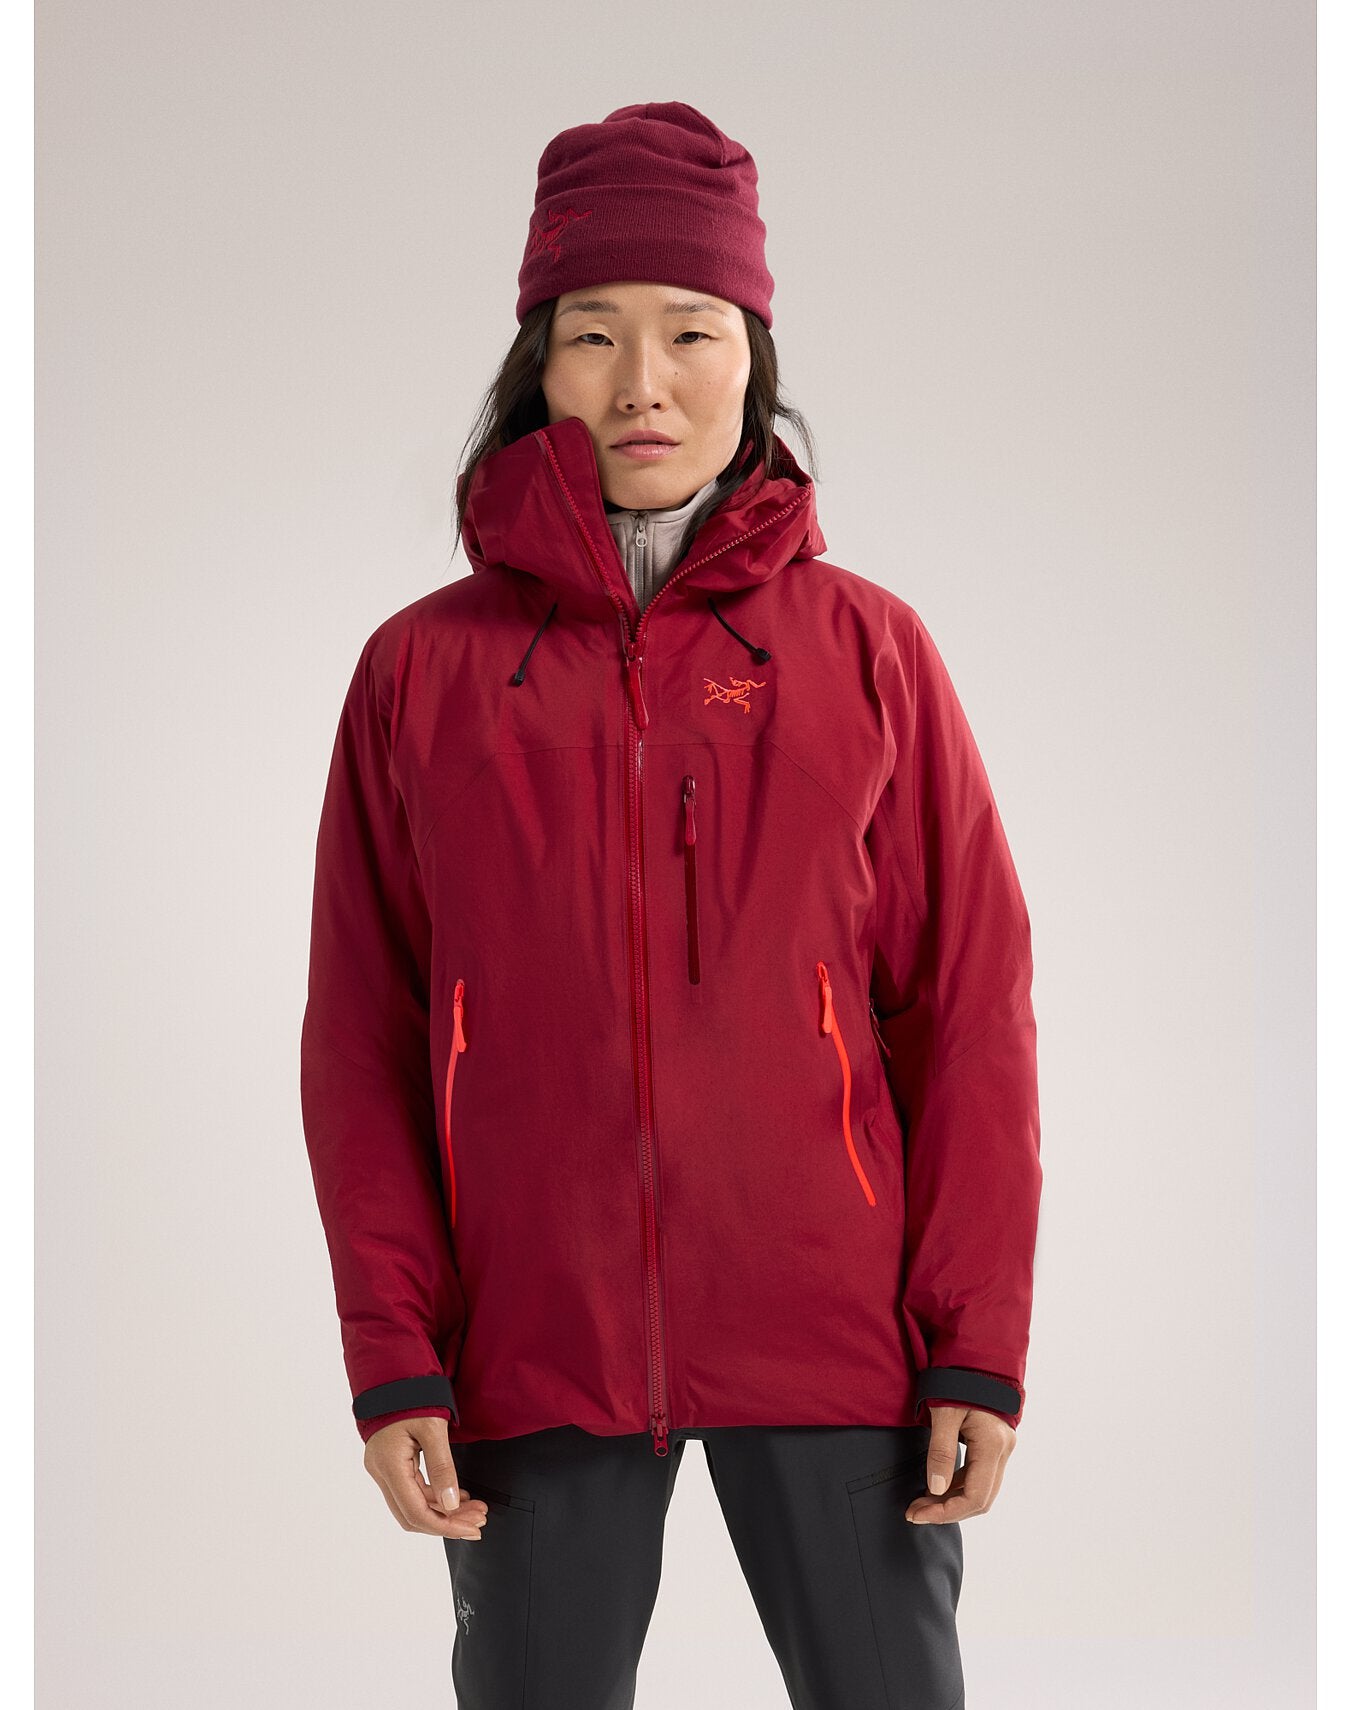 F23-X000006834-Beta-Insulated-Jacket-Bordeaux-Women-s-Front-View.jpg